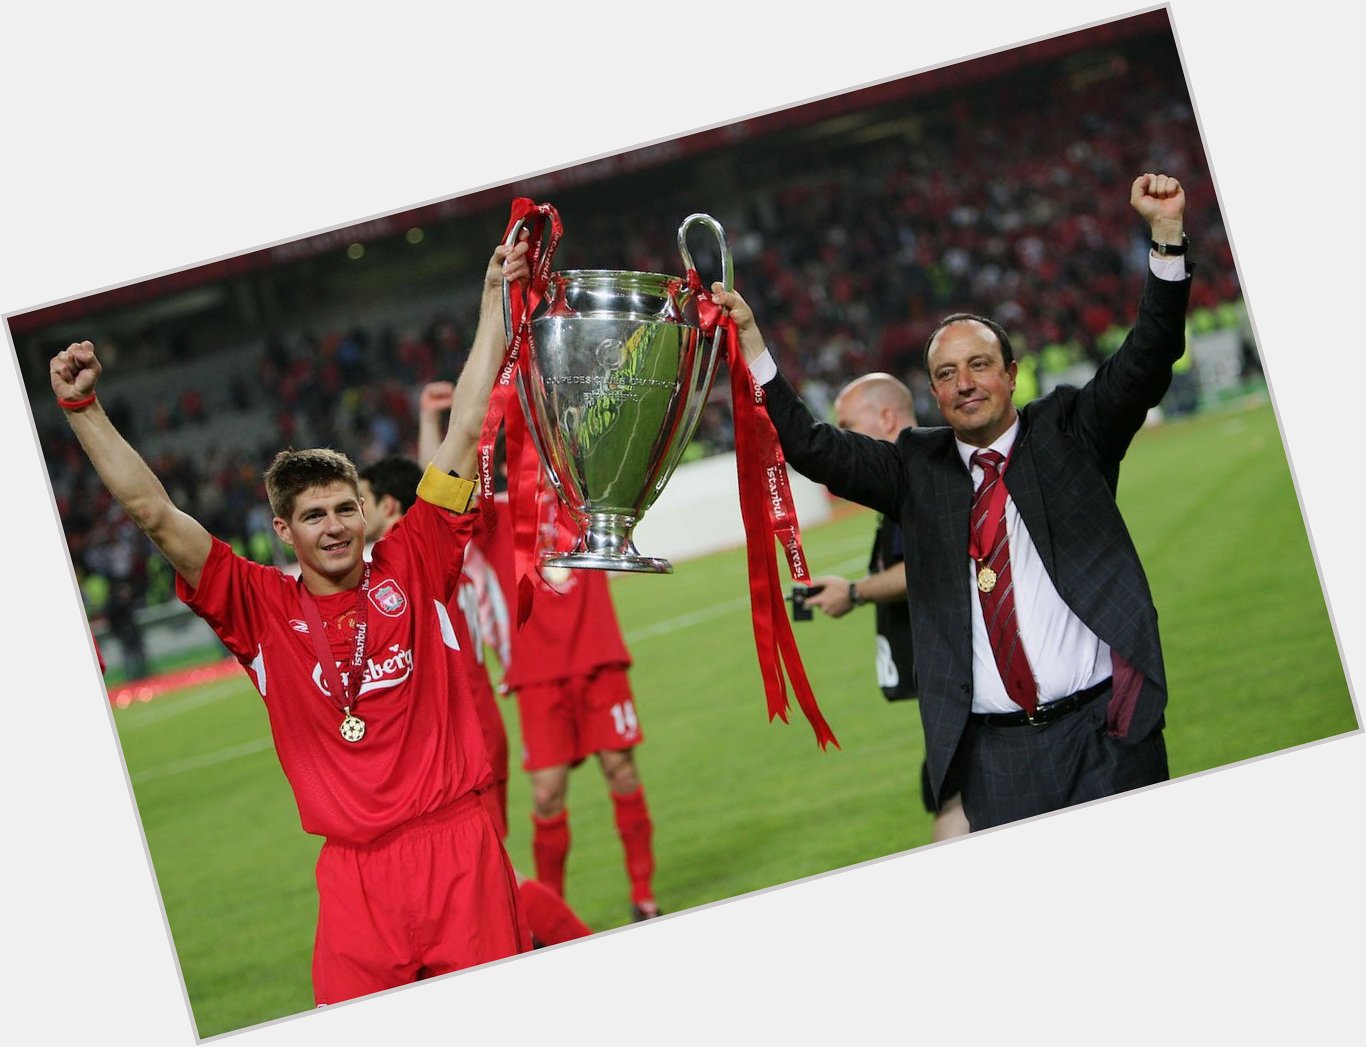 Happy 57th birthday to a Liverpool legend, Rafael Benitez! Have a great one!  